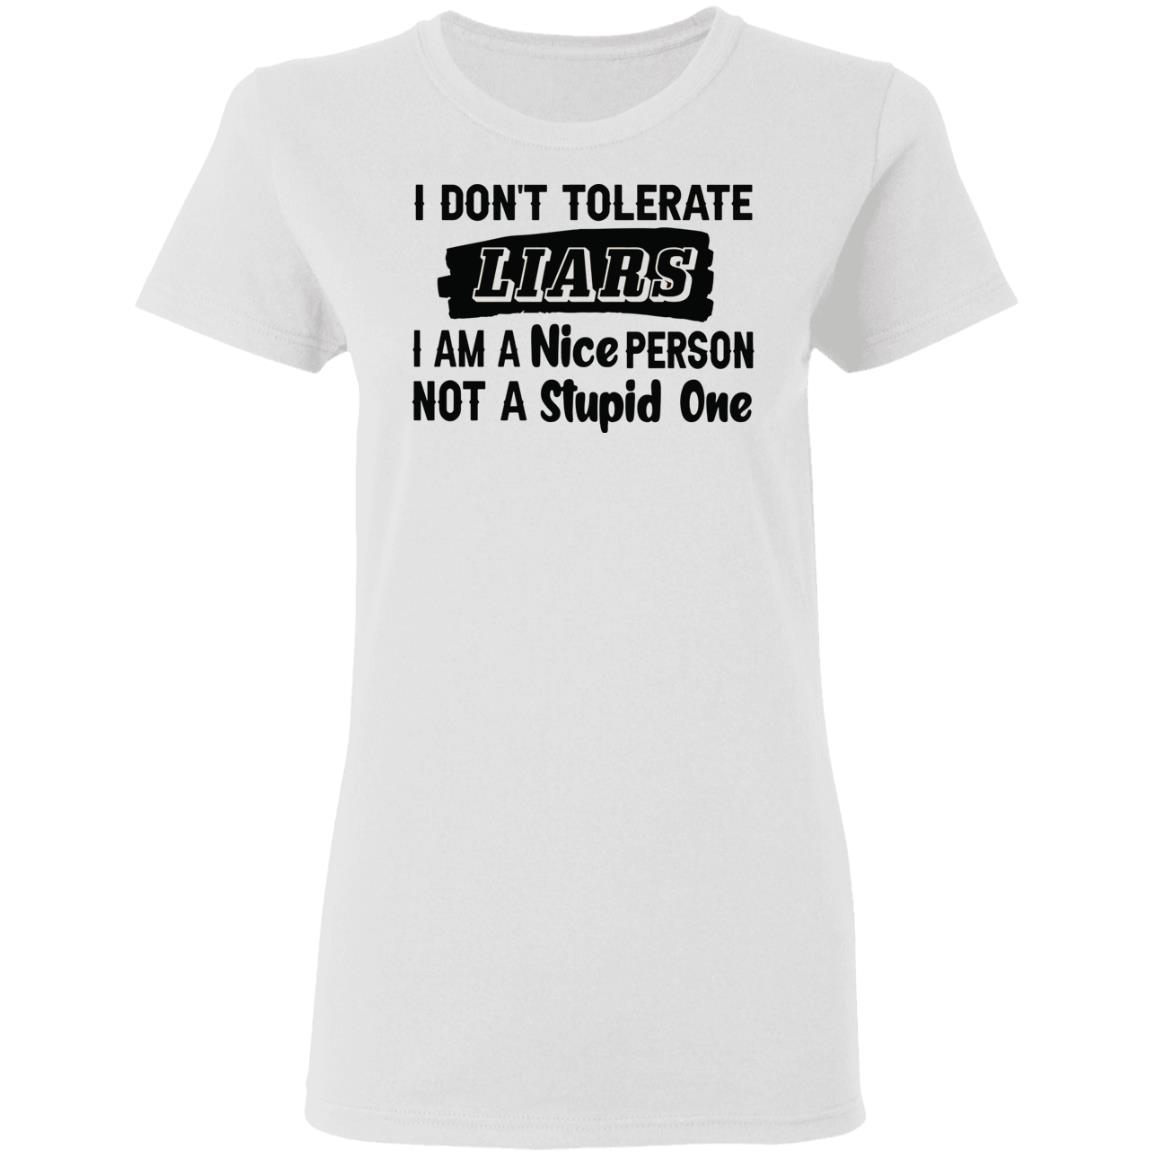 I don't tolerate liars i am a nice person not a stupid one shirt - Rockatee